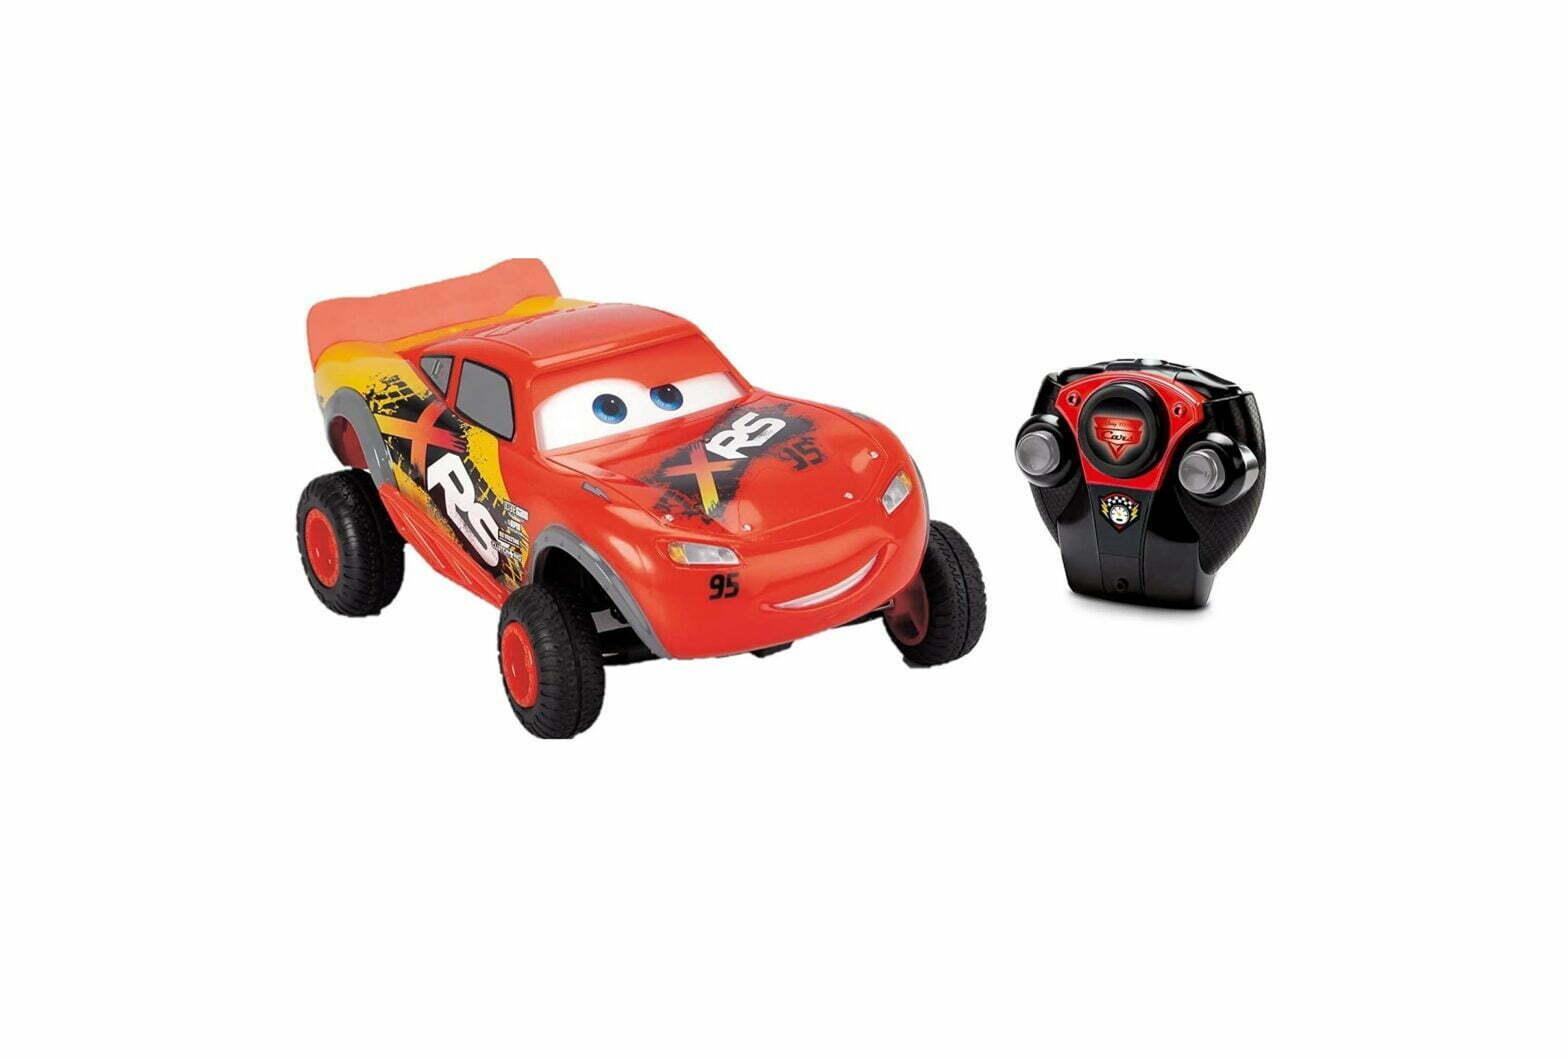 DICKIE TOYS 24050 Pixar Cars 124 Lightning McQueen XRS RC User Guide - Featured image